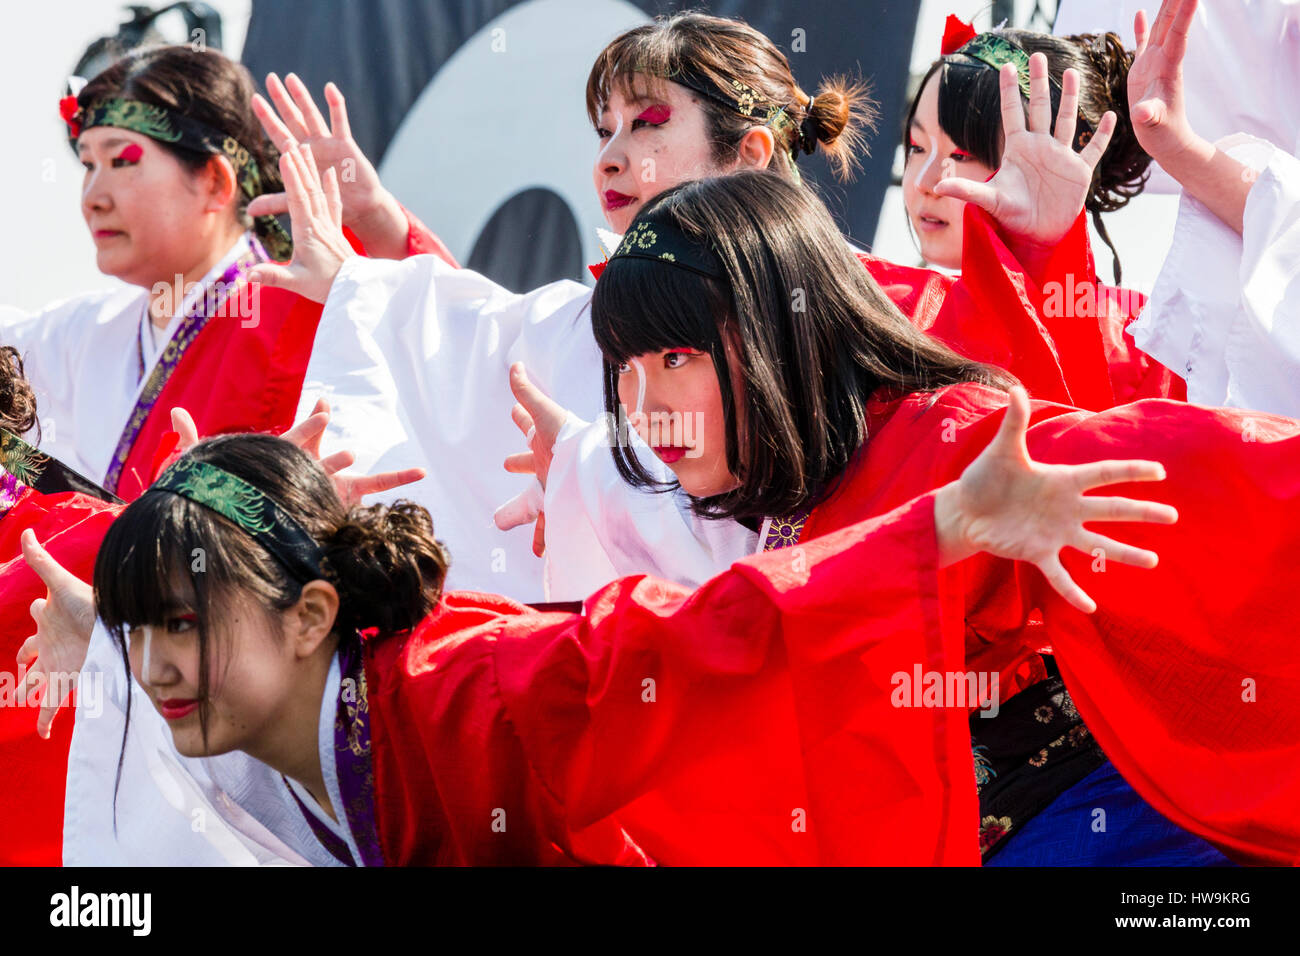 Hinokuni Yosakoi dance Festival. Women teenage dancers in red and white yukata with long sleeves, leaning forward, arms outstretched. Close-up, side. Stock Photo